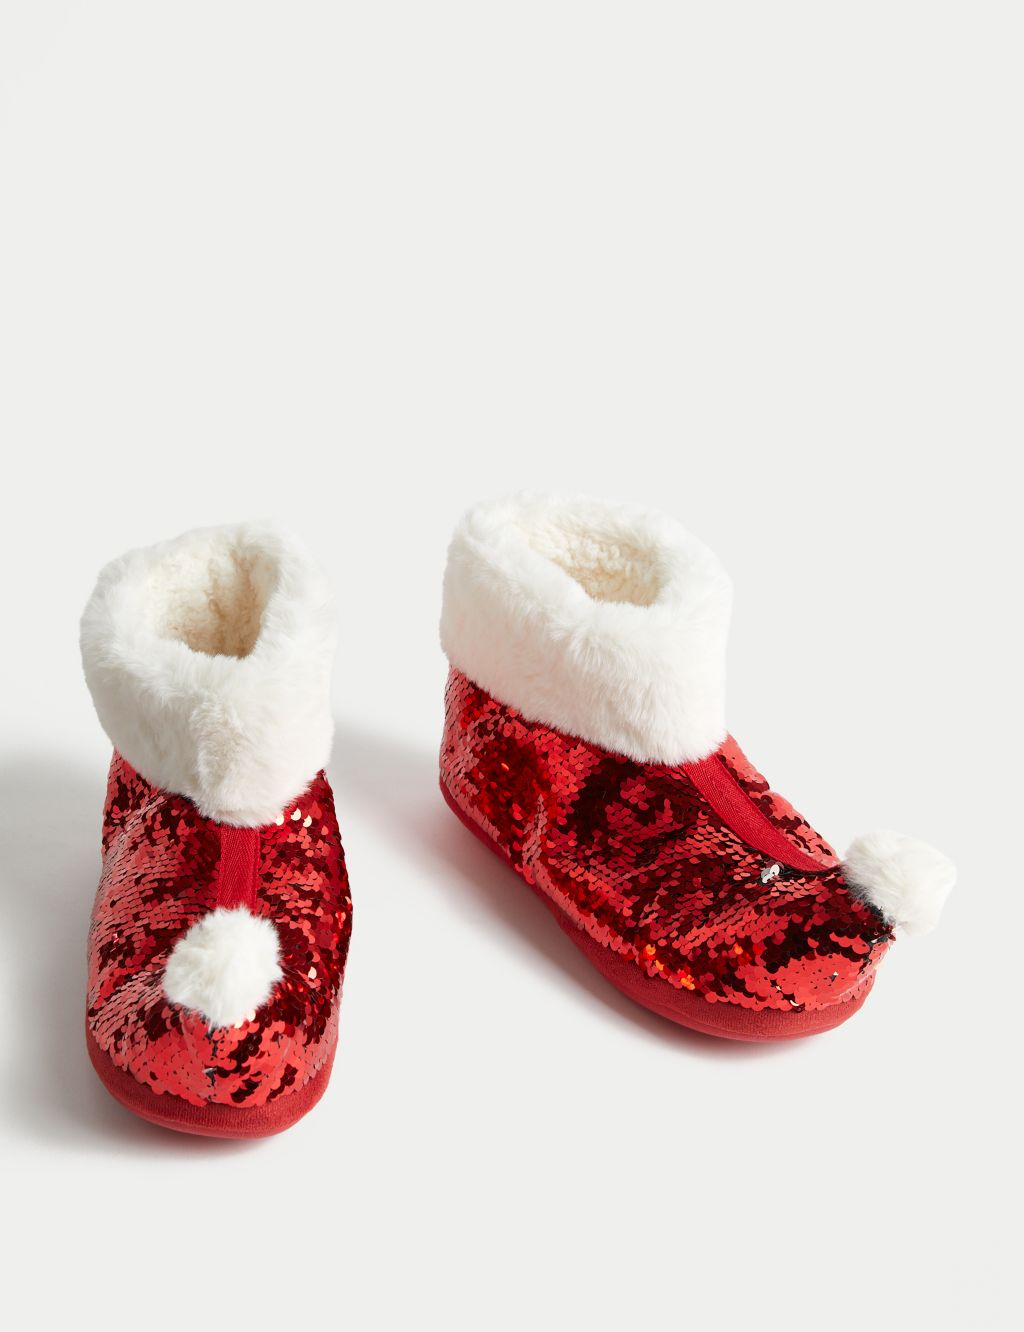 Kids' Christmas Sequin Slipper Boots (13 Small - 6 Large) image 2